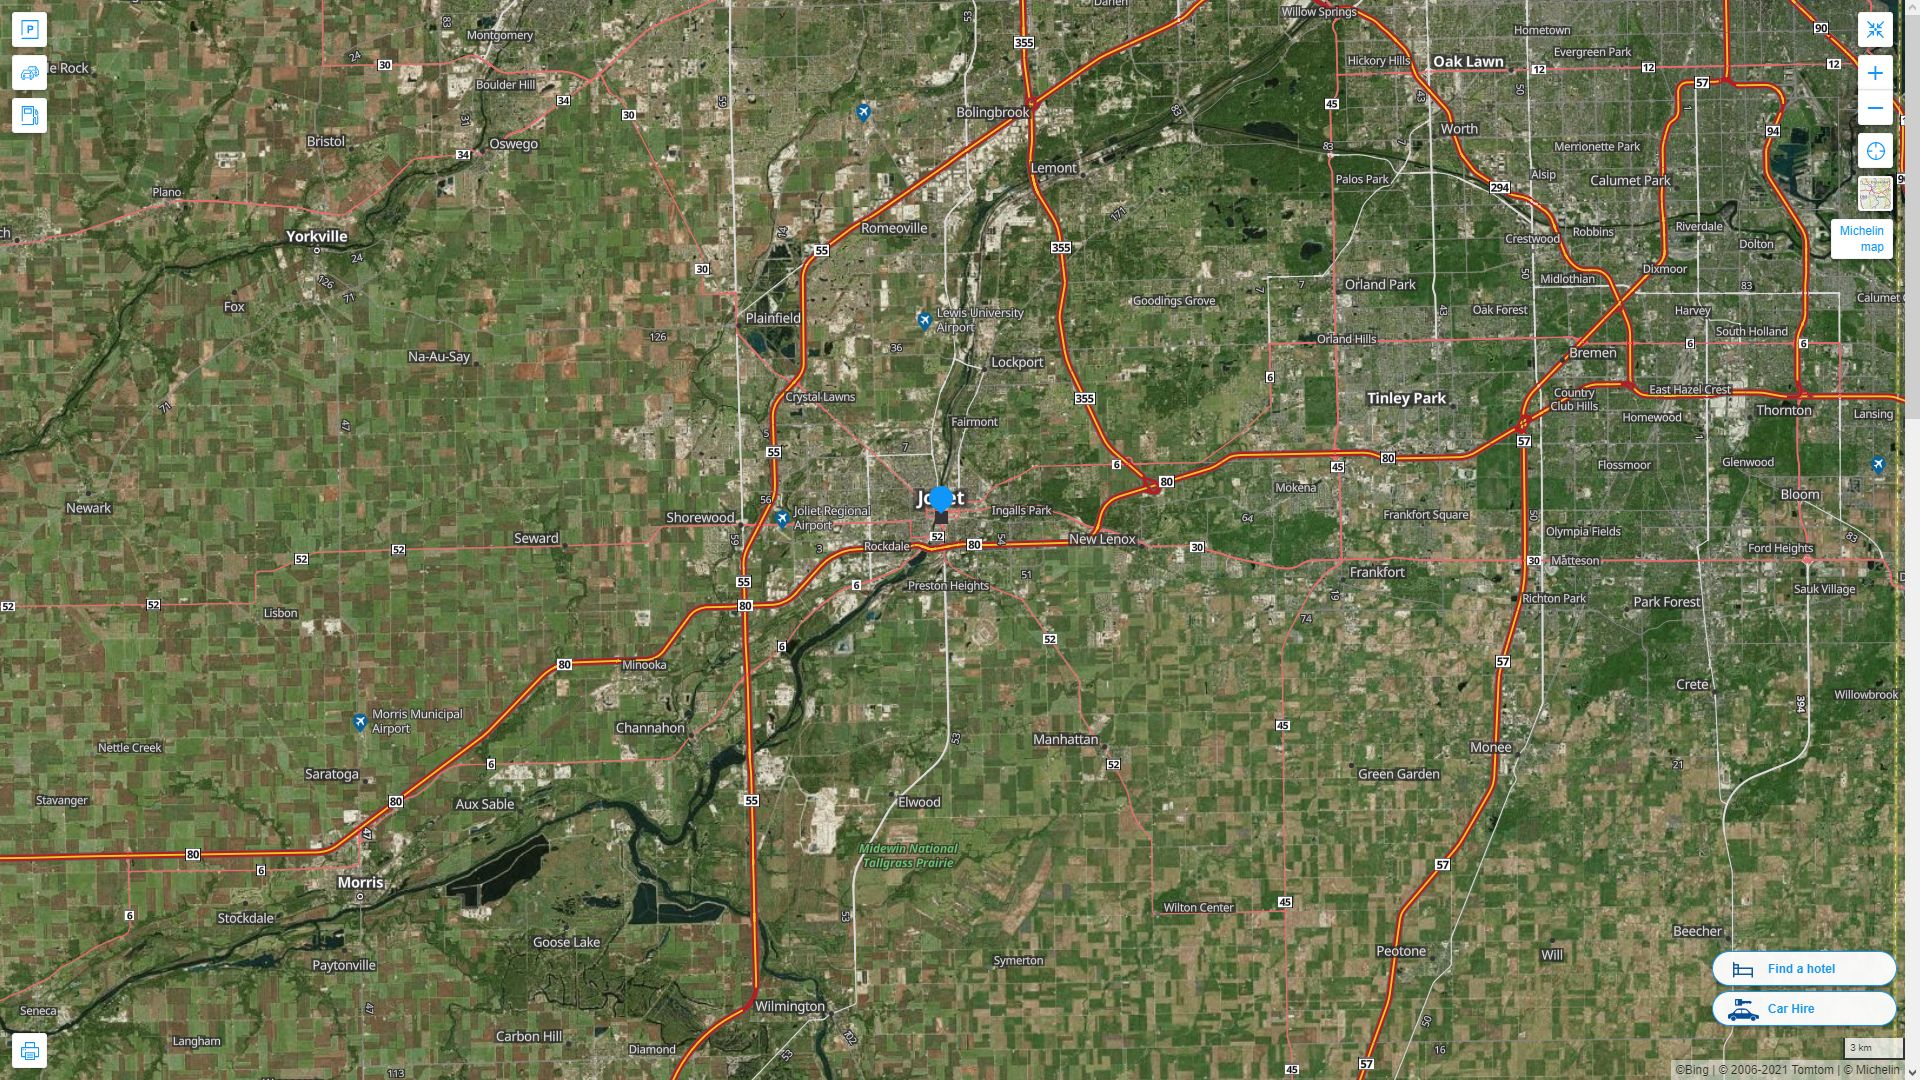 Joliet illinois Highway and Road Map with Satellite View